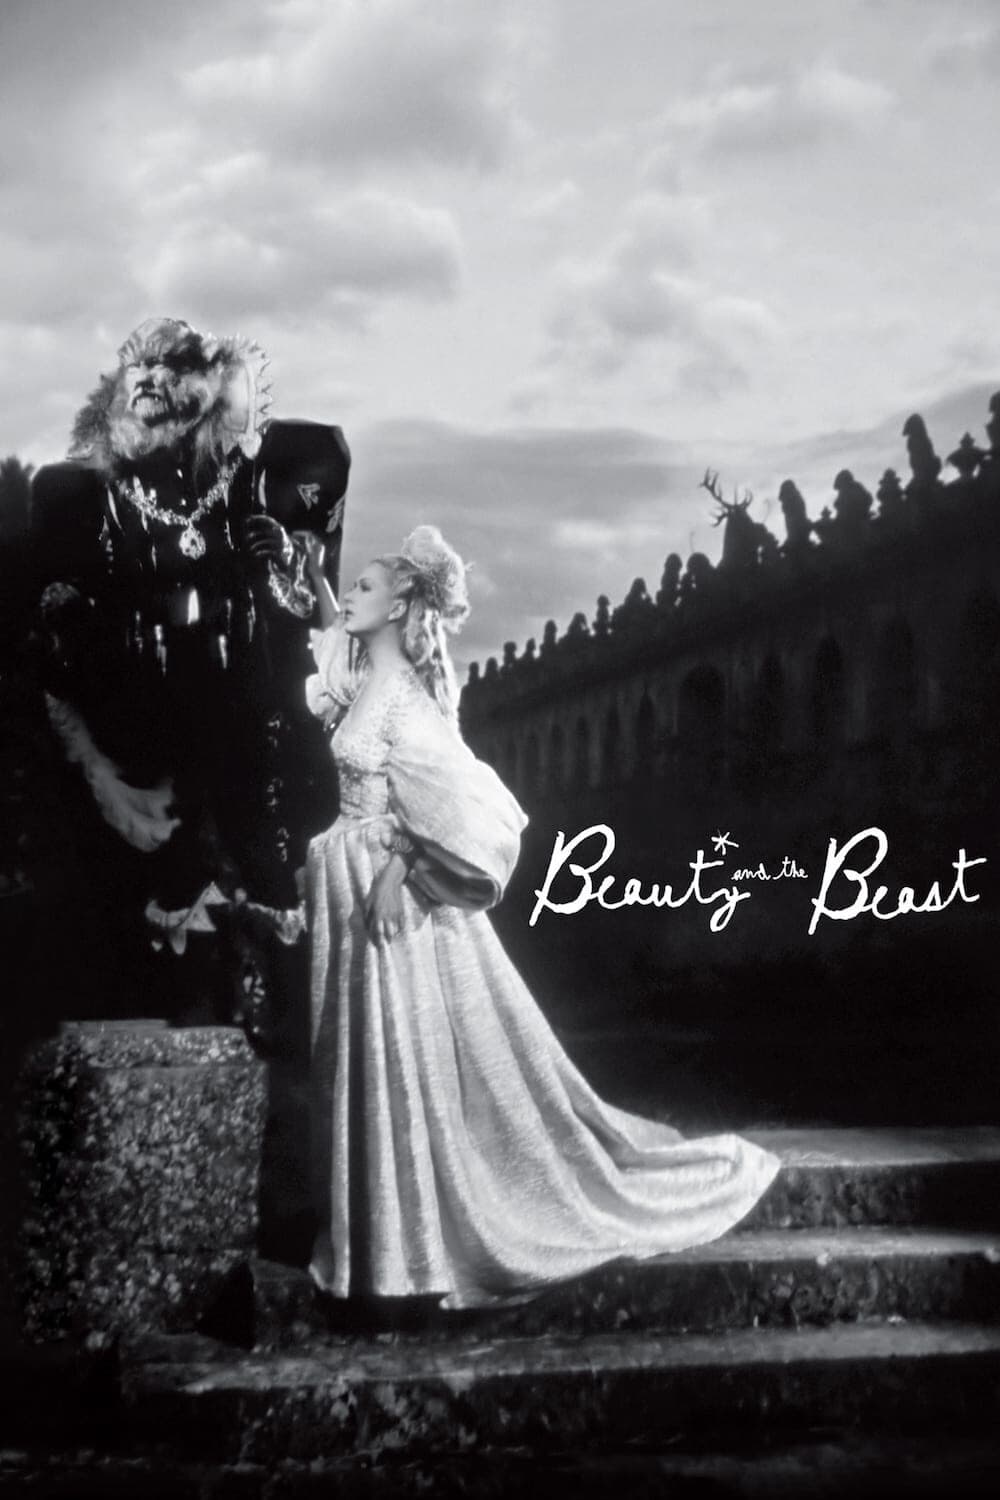 Beauty and the Beast (1946)